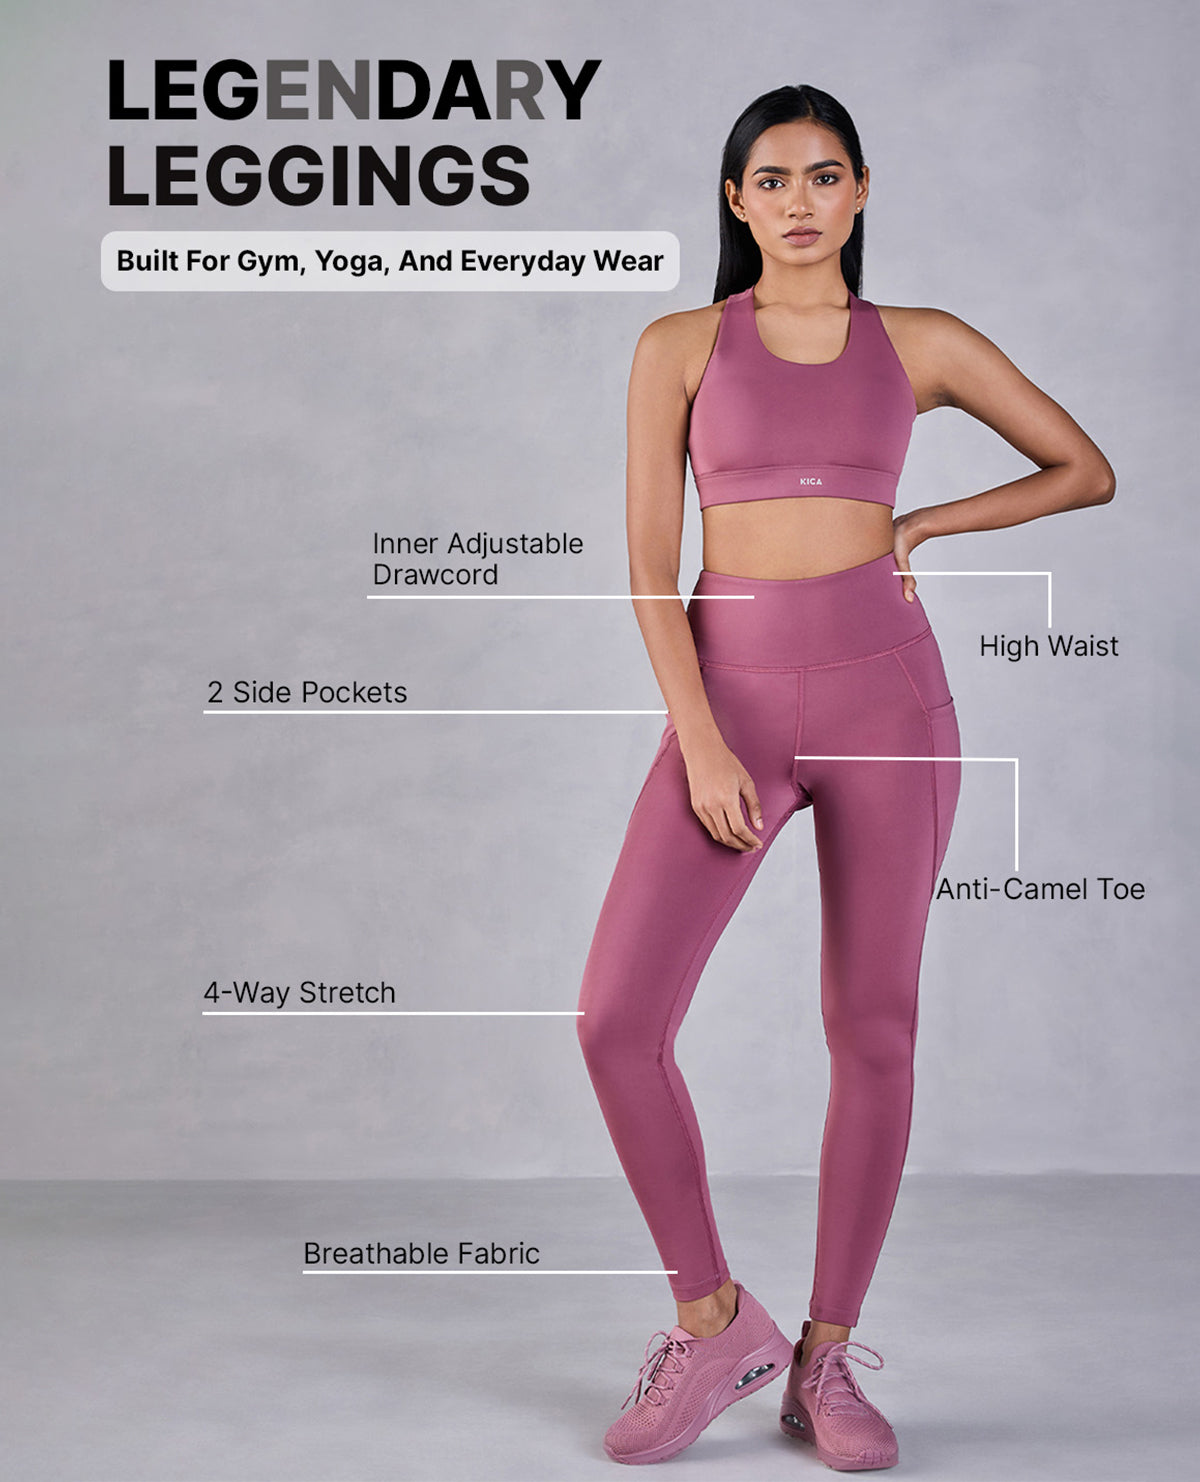 Buy Kica Cotton Low Impact Leggings For Yoga and Everyday Essentials Online